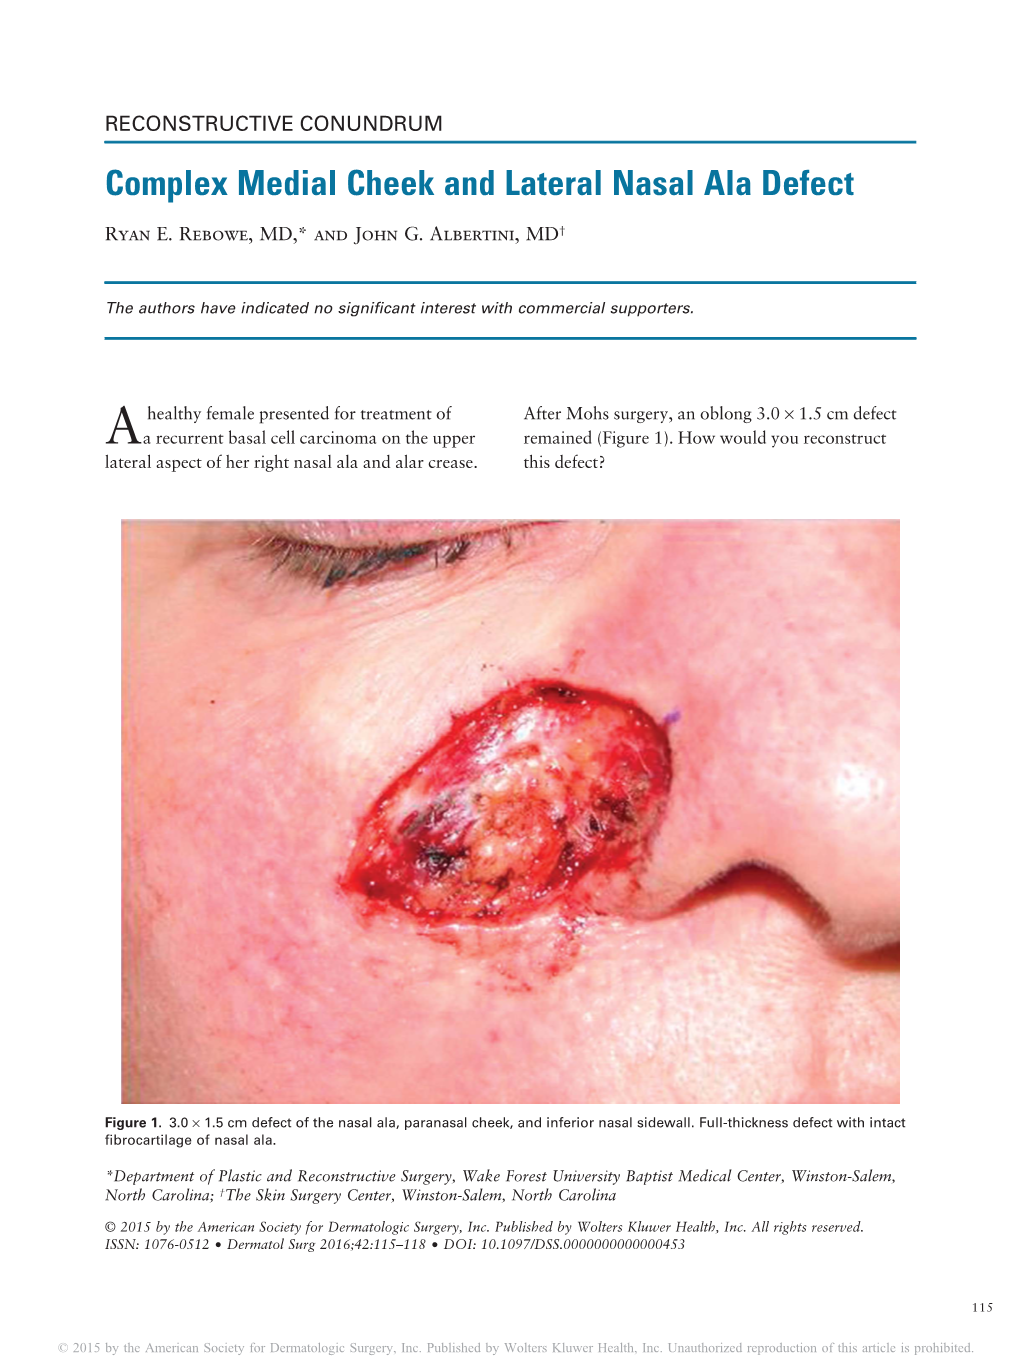 Complex Medial Cheek and Lateral Nasal Ala Defect